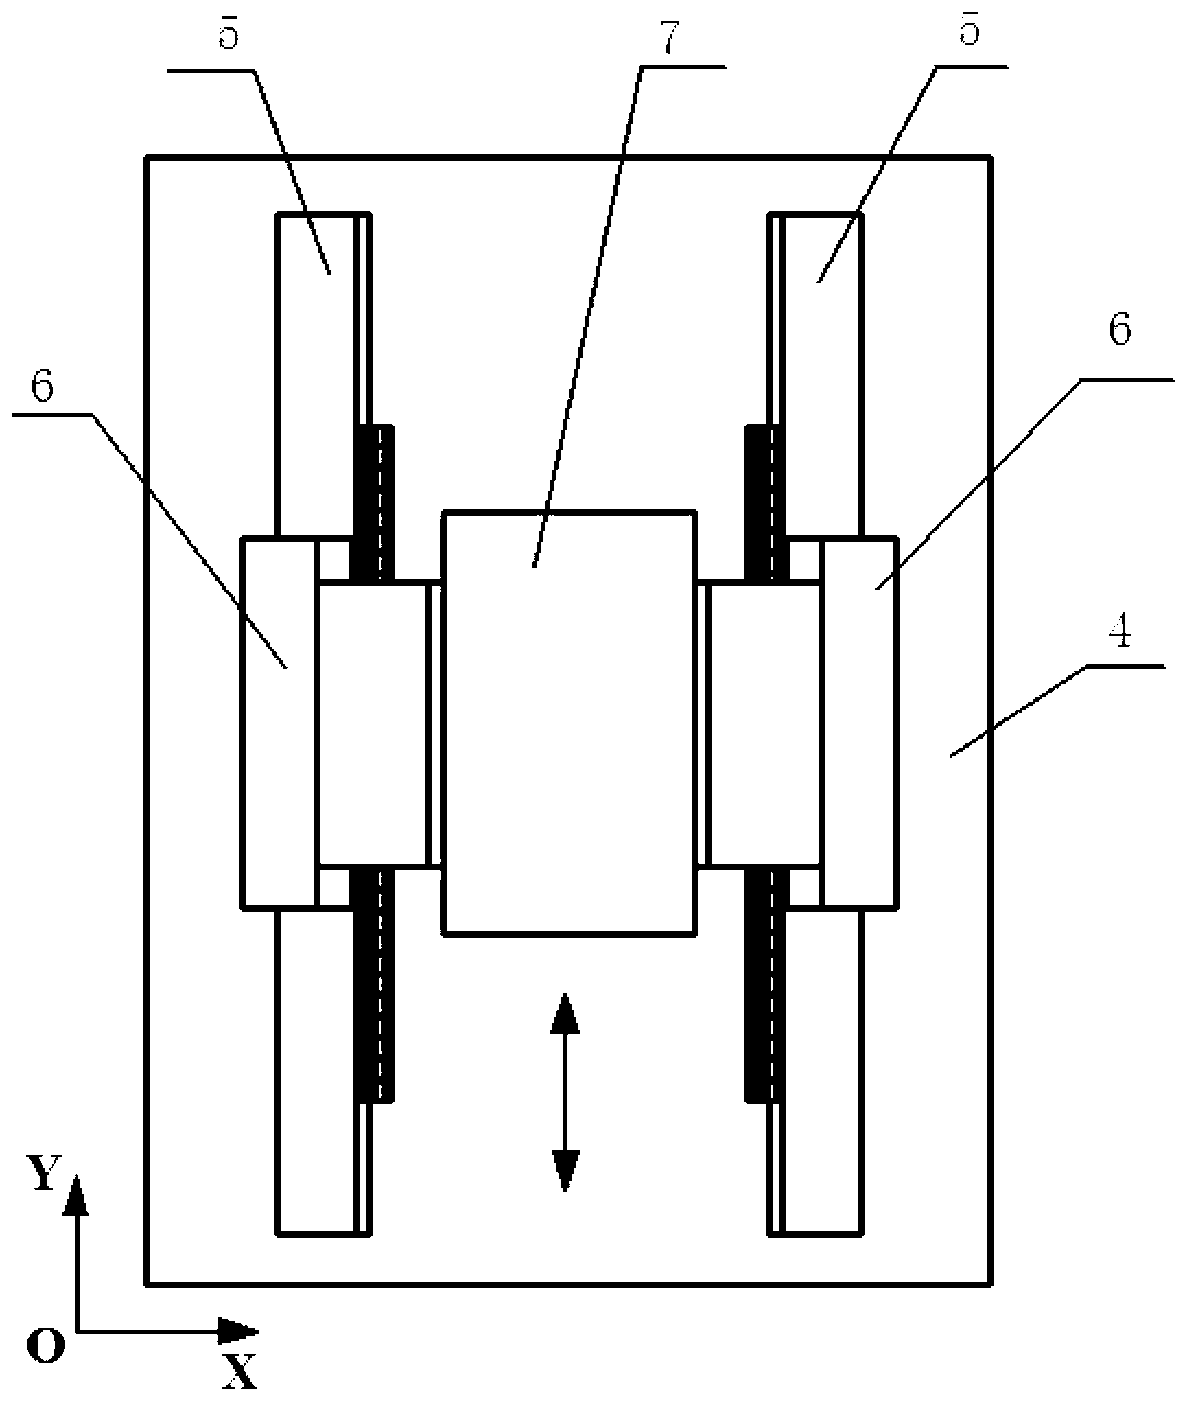 Positioning alignment apparatus of double-side driving workpiece platform without being connected by cross beam